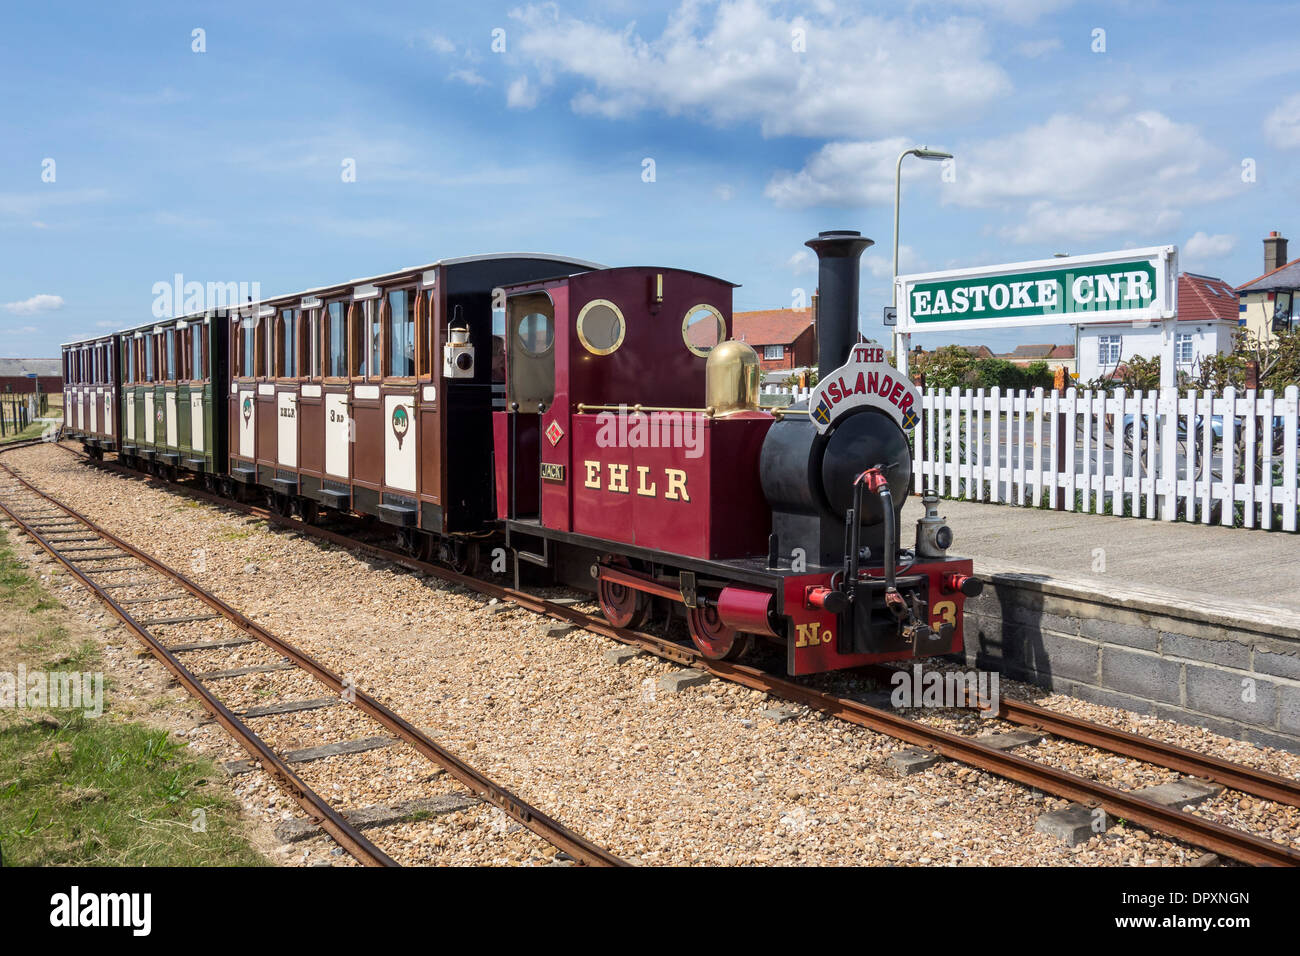 Hayling Island Railway Station Banque D'Images